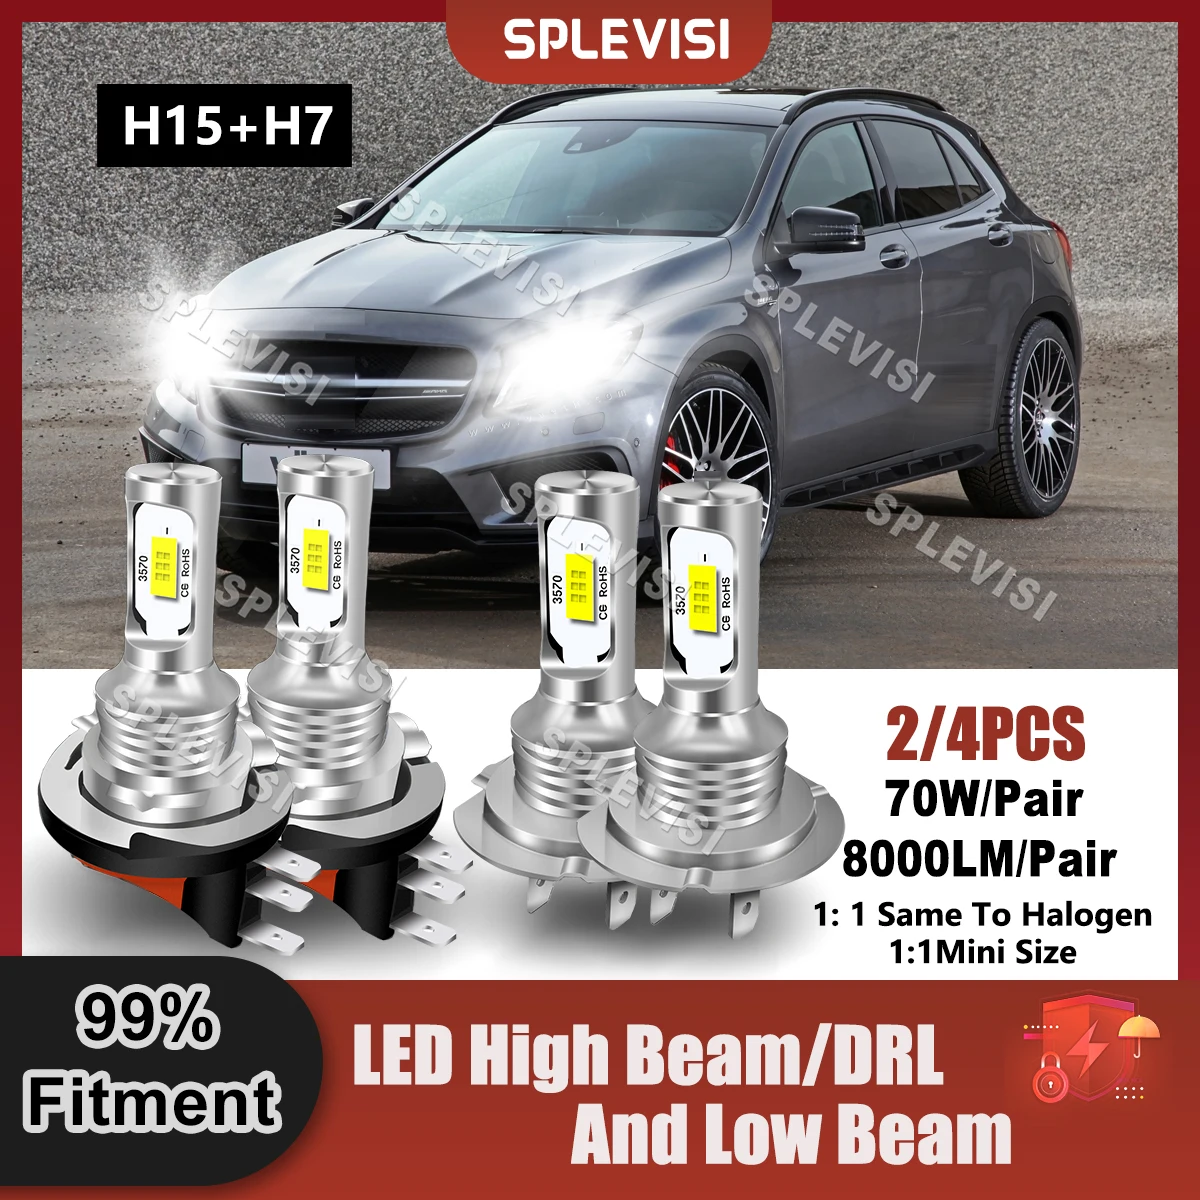 

Plug And Play H15+H7 LED Headlight High Beam/DRL+Low Beam For Mercedes X156 2014 2015 2016 2017 2018 2019 2020 2021 2022 2023